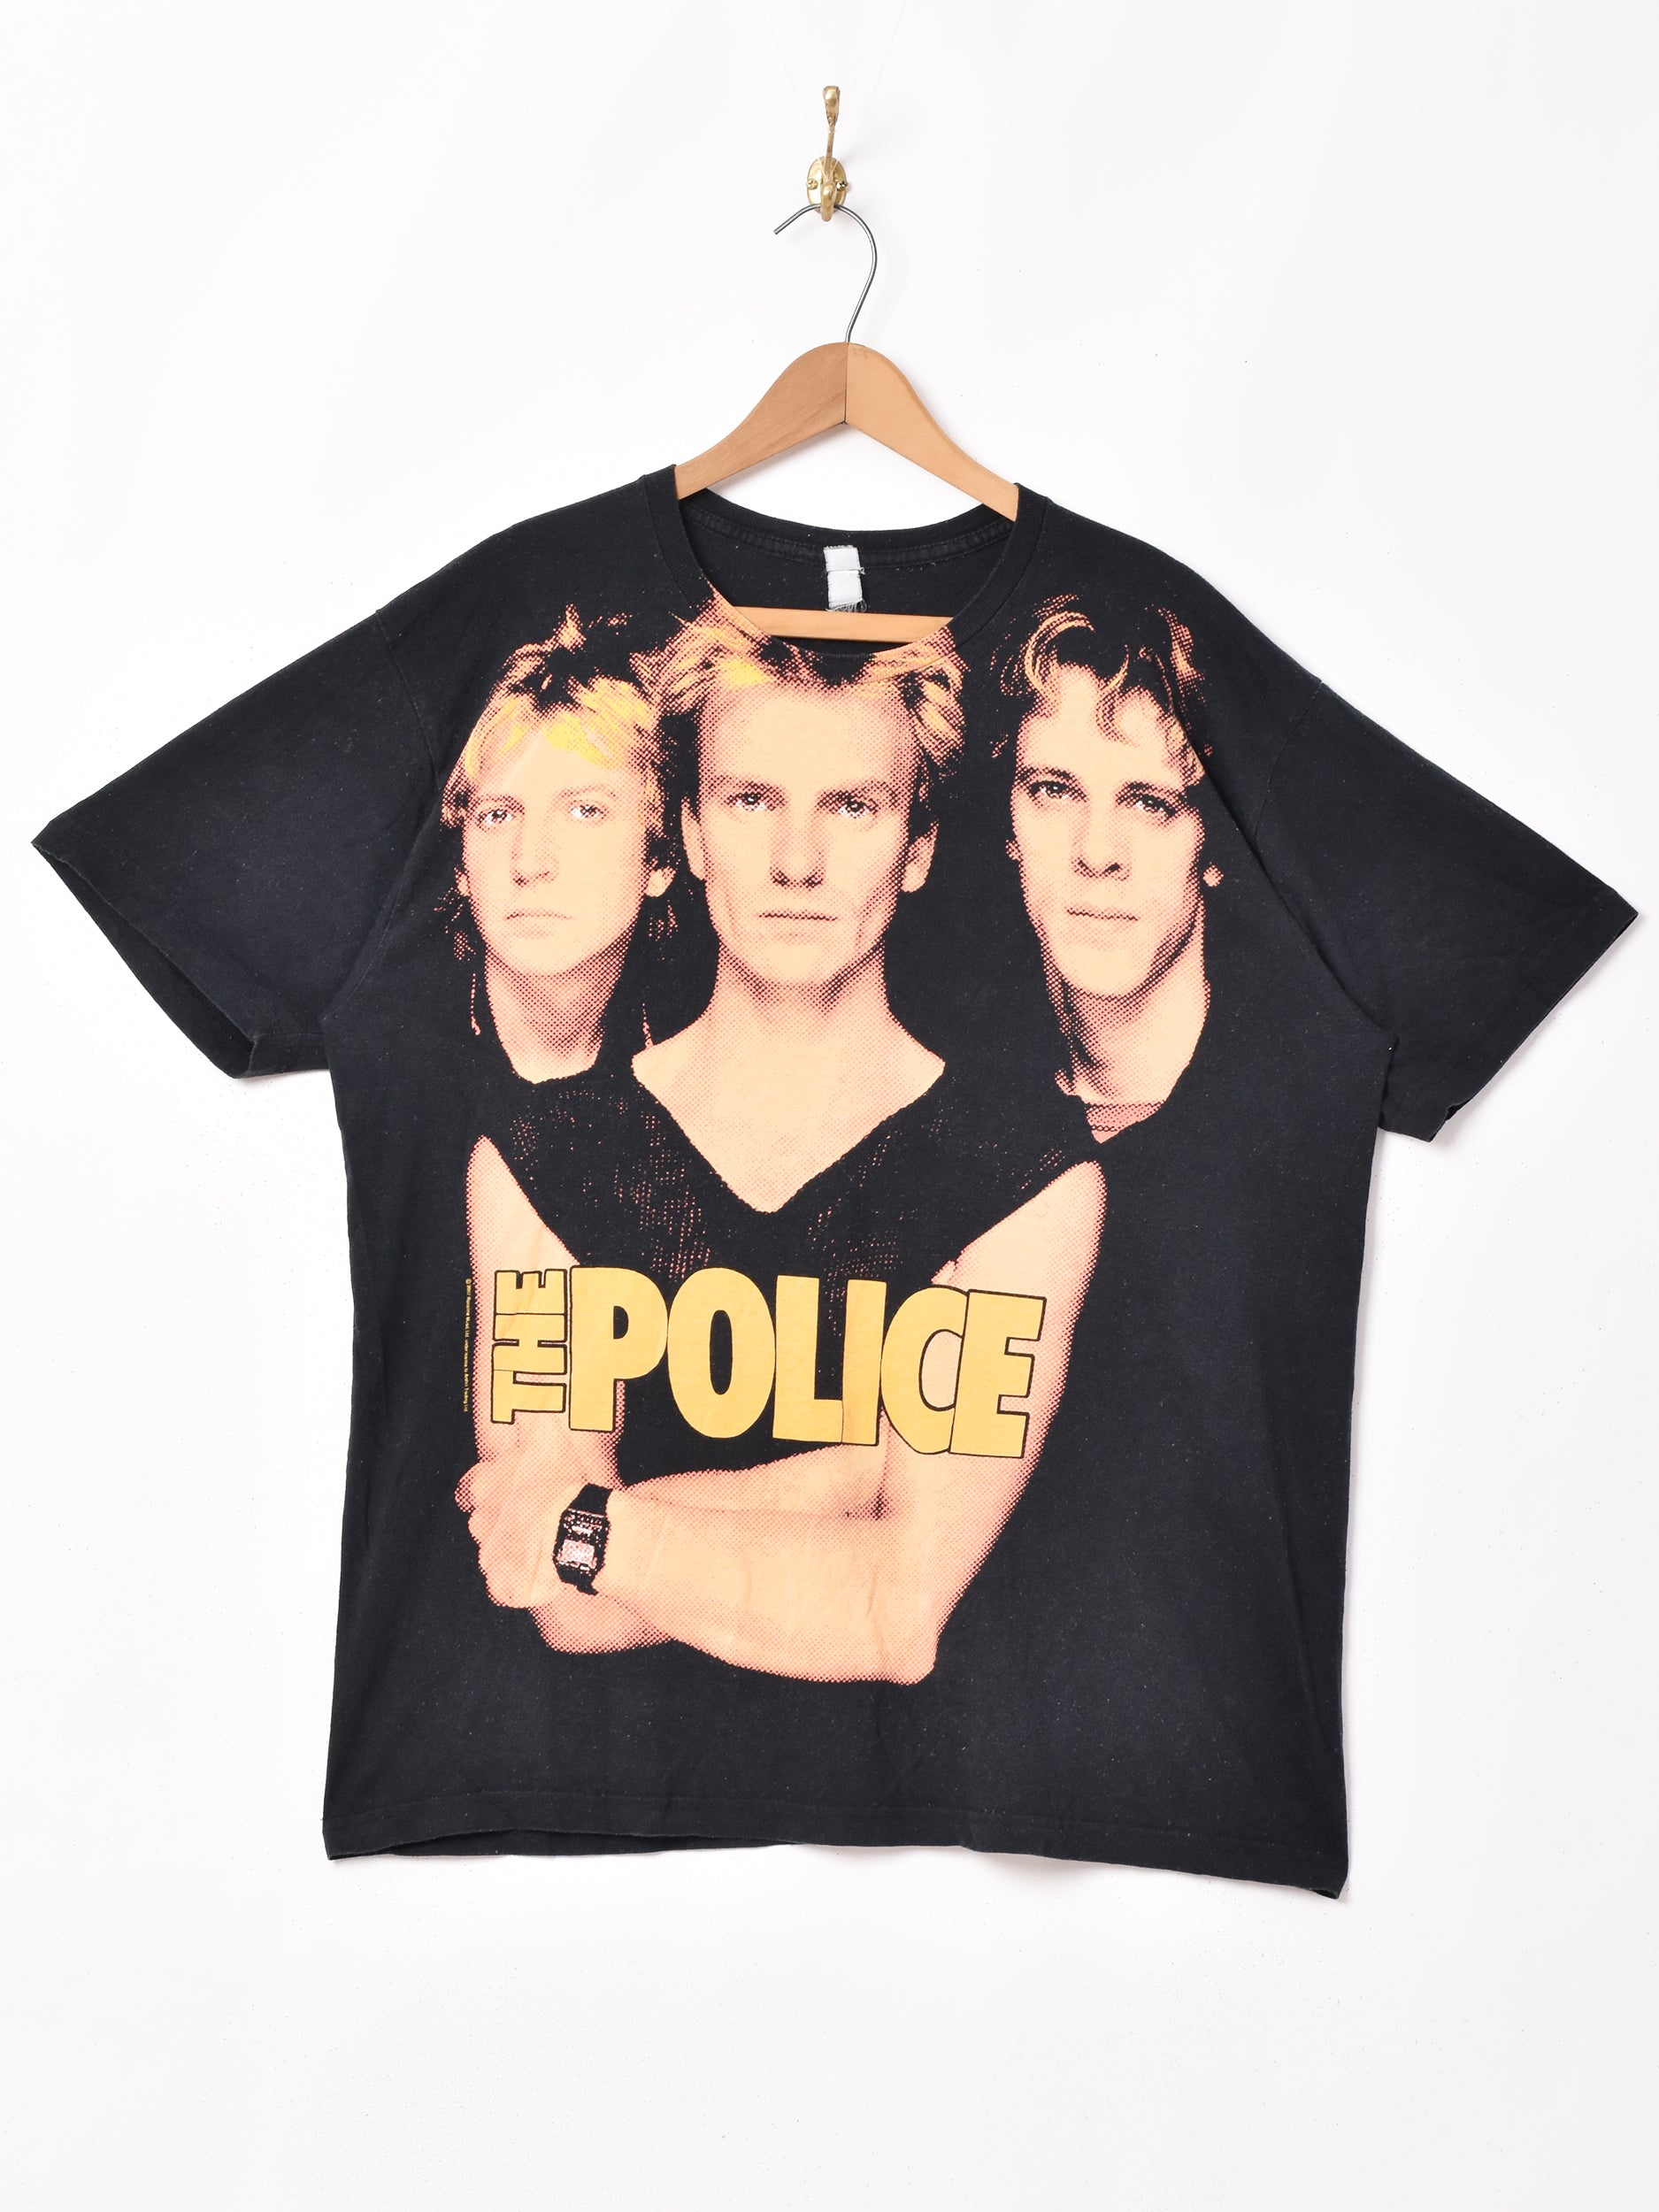 THE POLICE バンドTシャツ – 古着屋Top of the Hillのネット通販